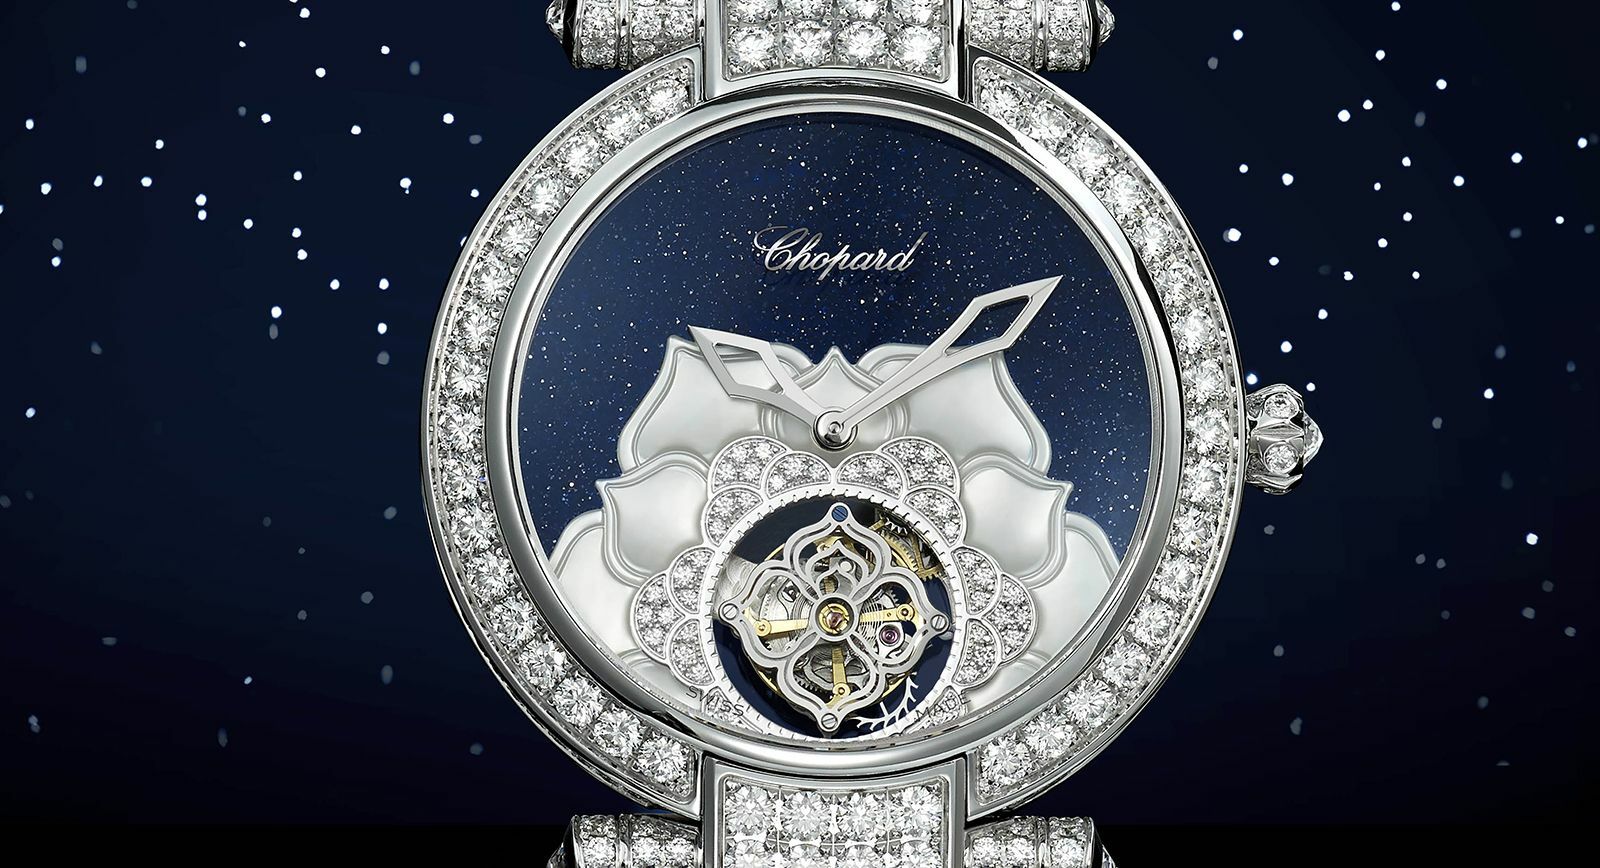 Chopard Imperiale Flying Tourbillon watch released at Watches and Wonders 2022